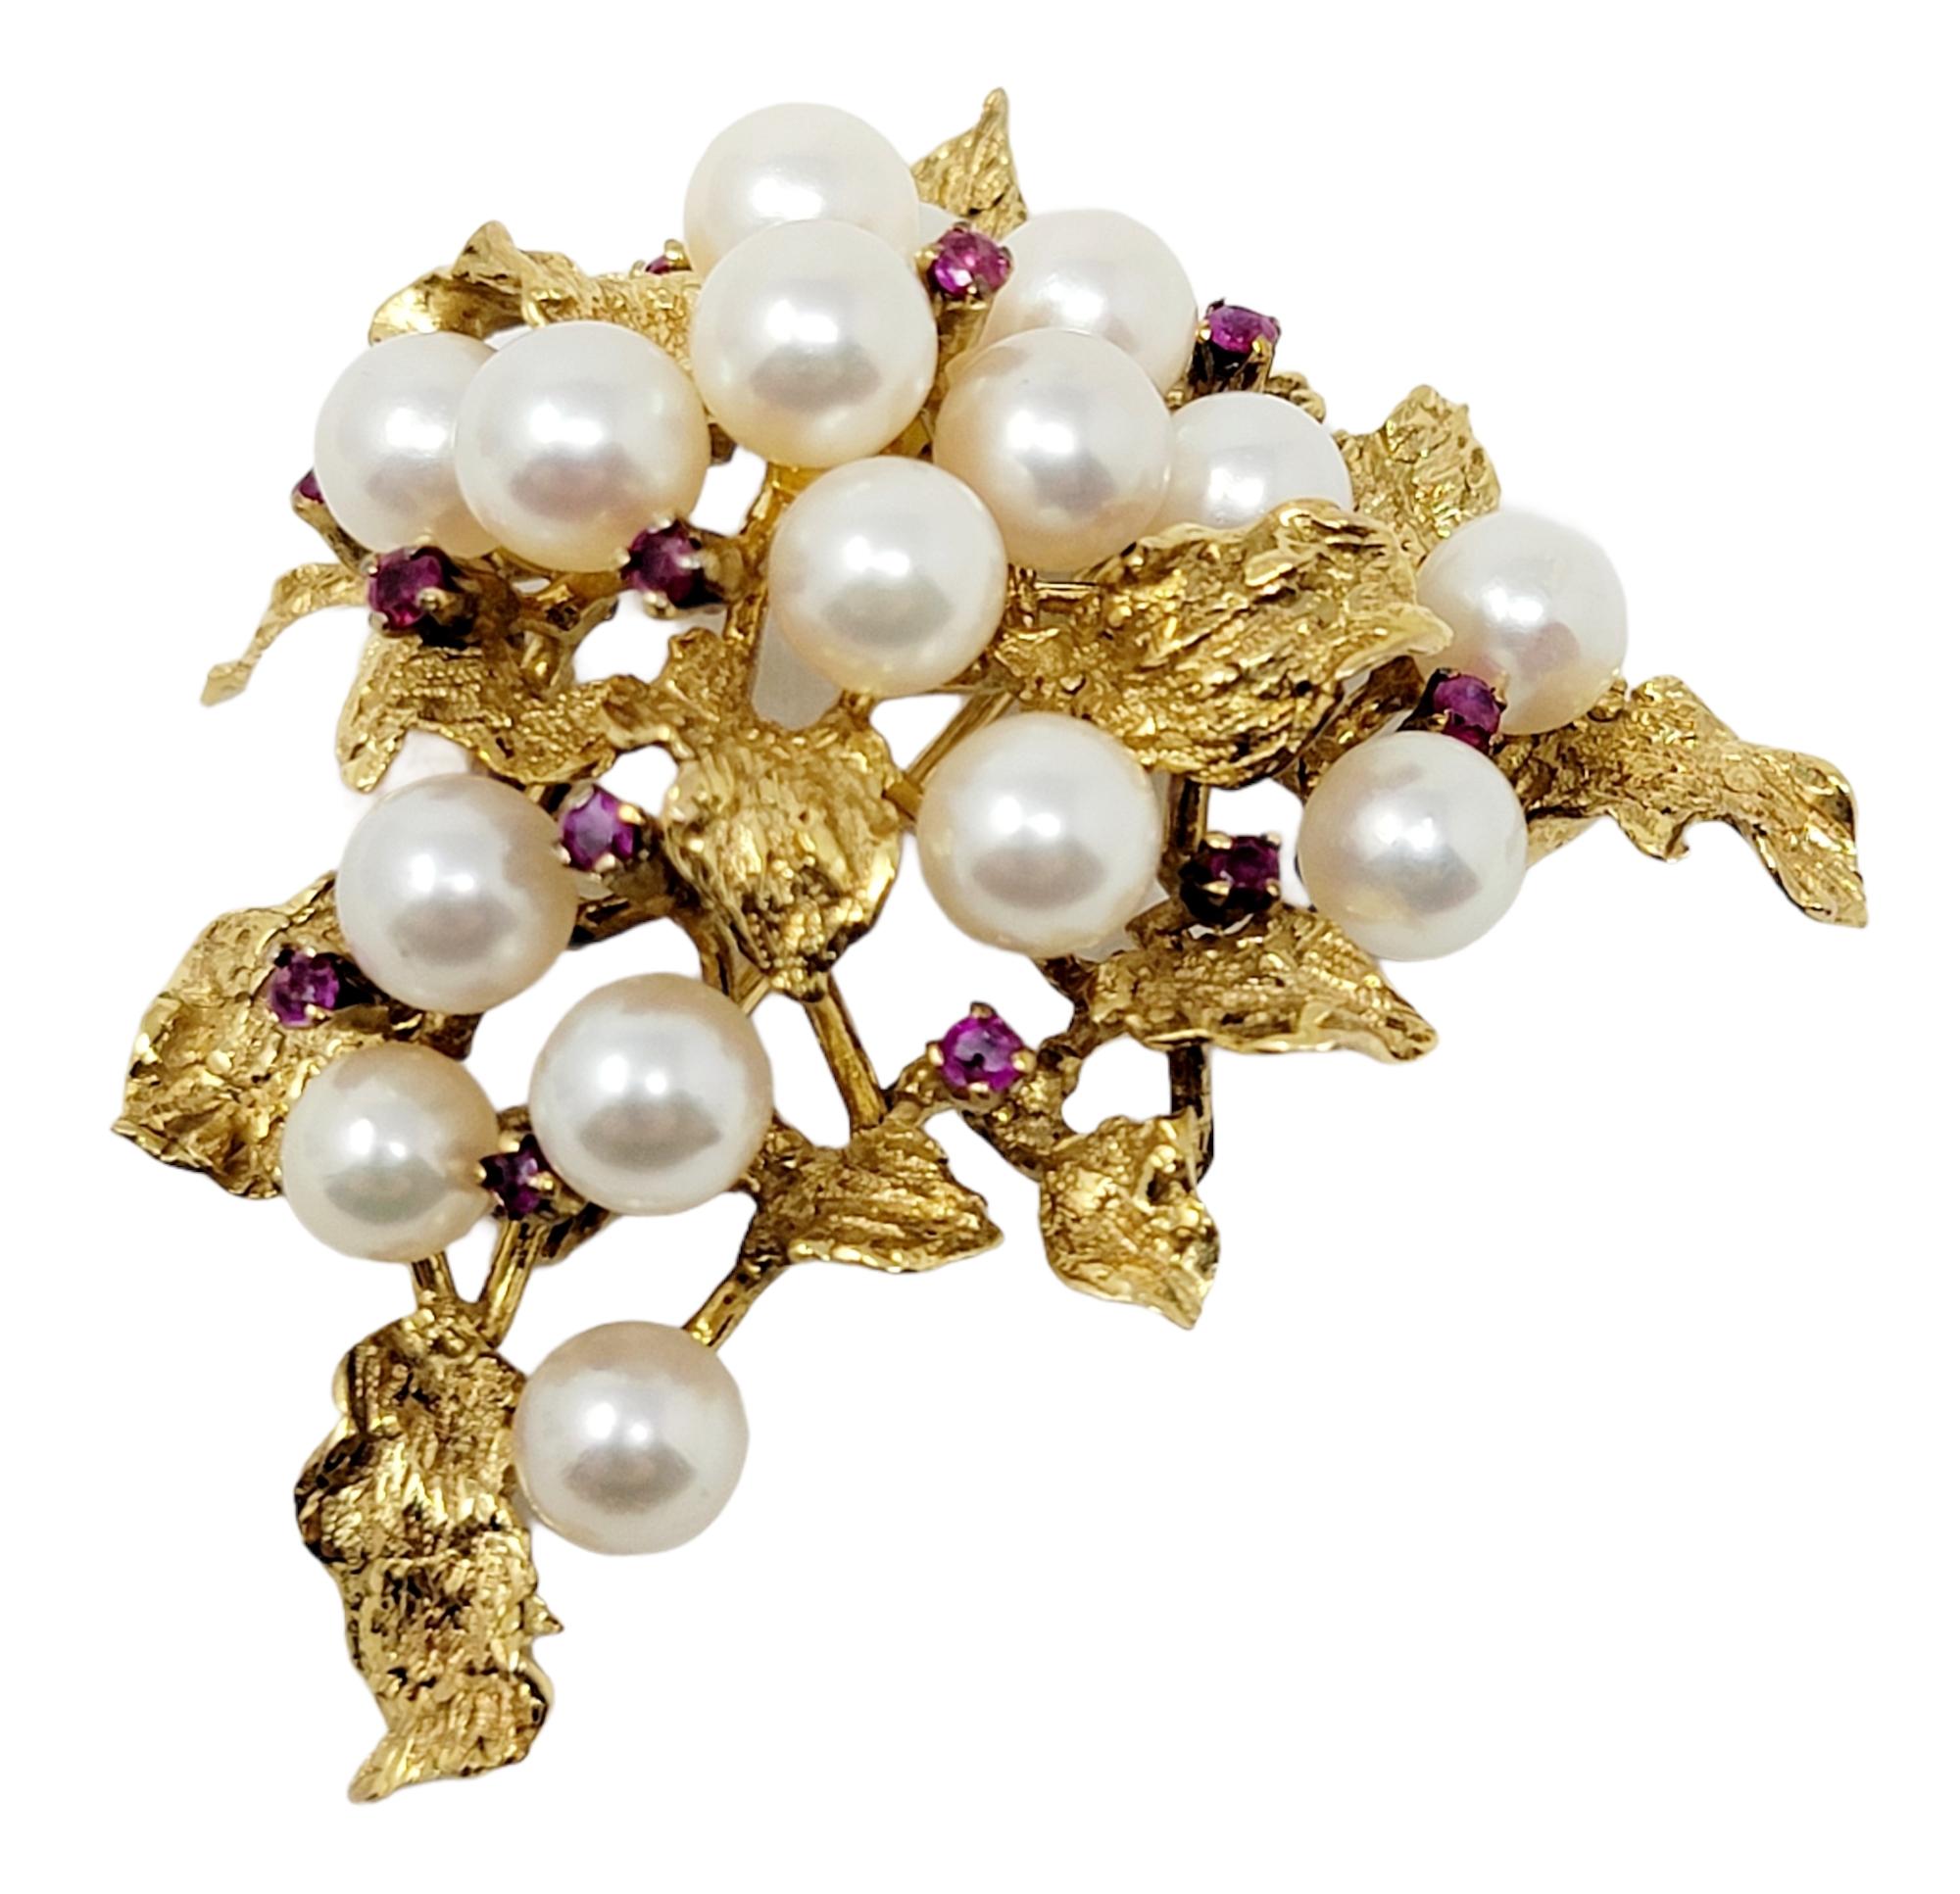 Vintage 14 Karat Yellow Gold Large Leaf Cluster Brooch with Pearls and Rubies For Sale 2